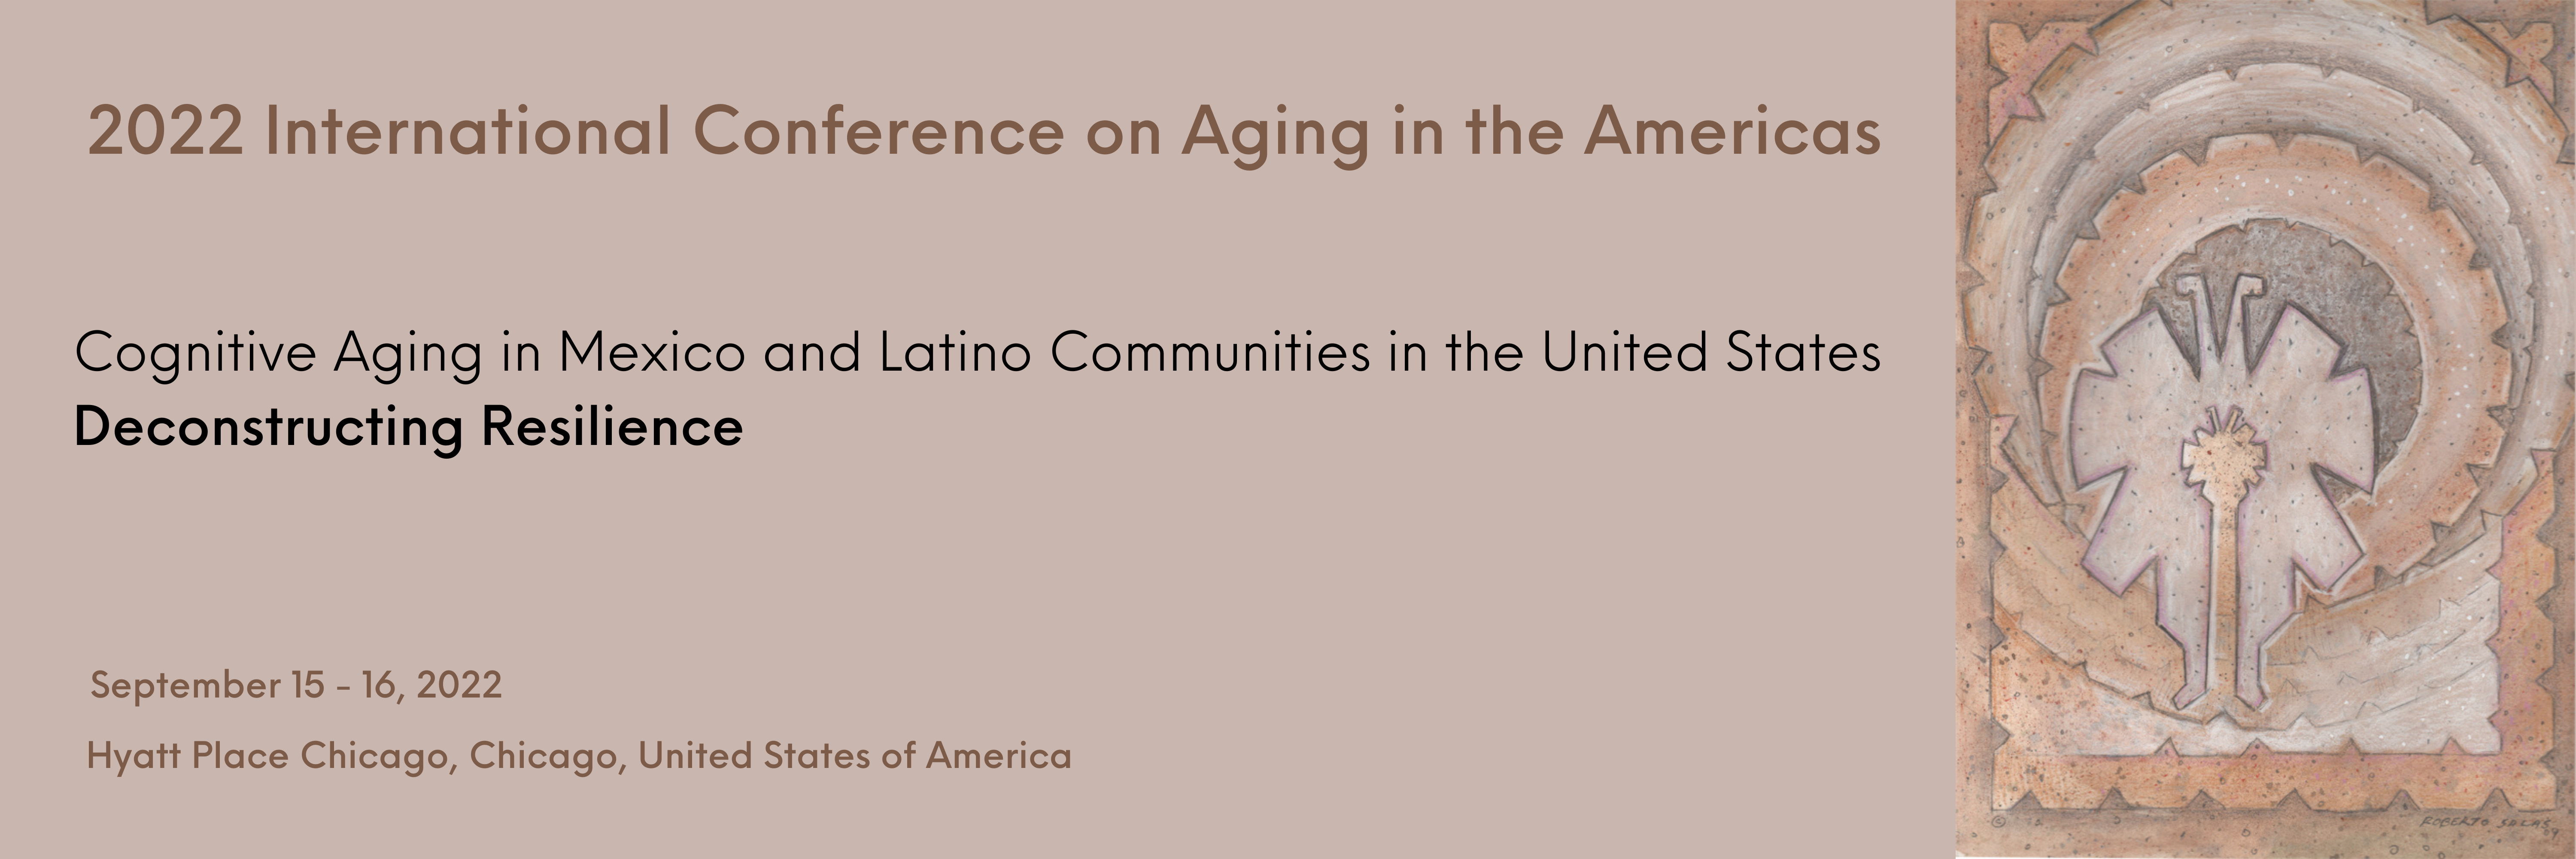 Aging in the Americas Banner